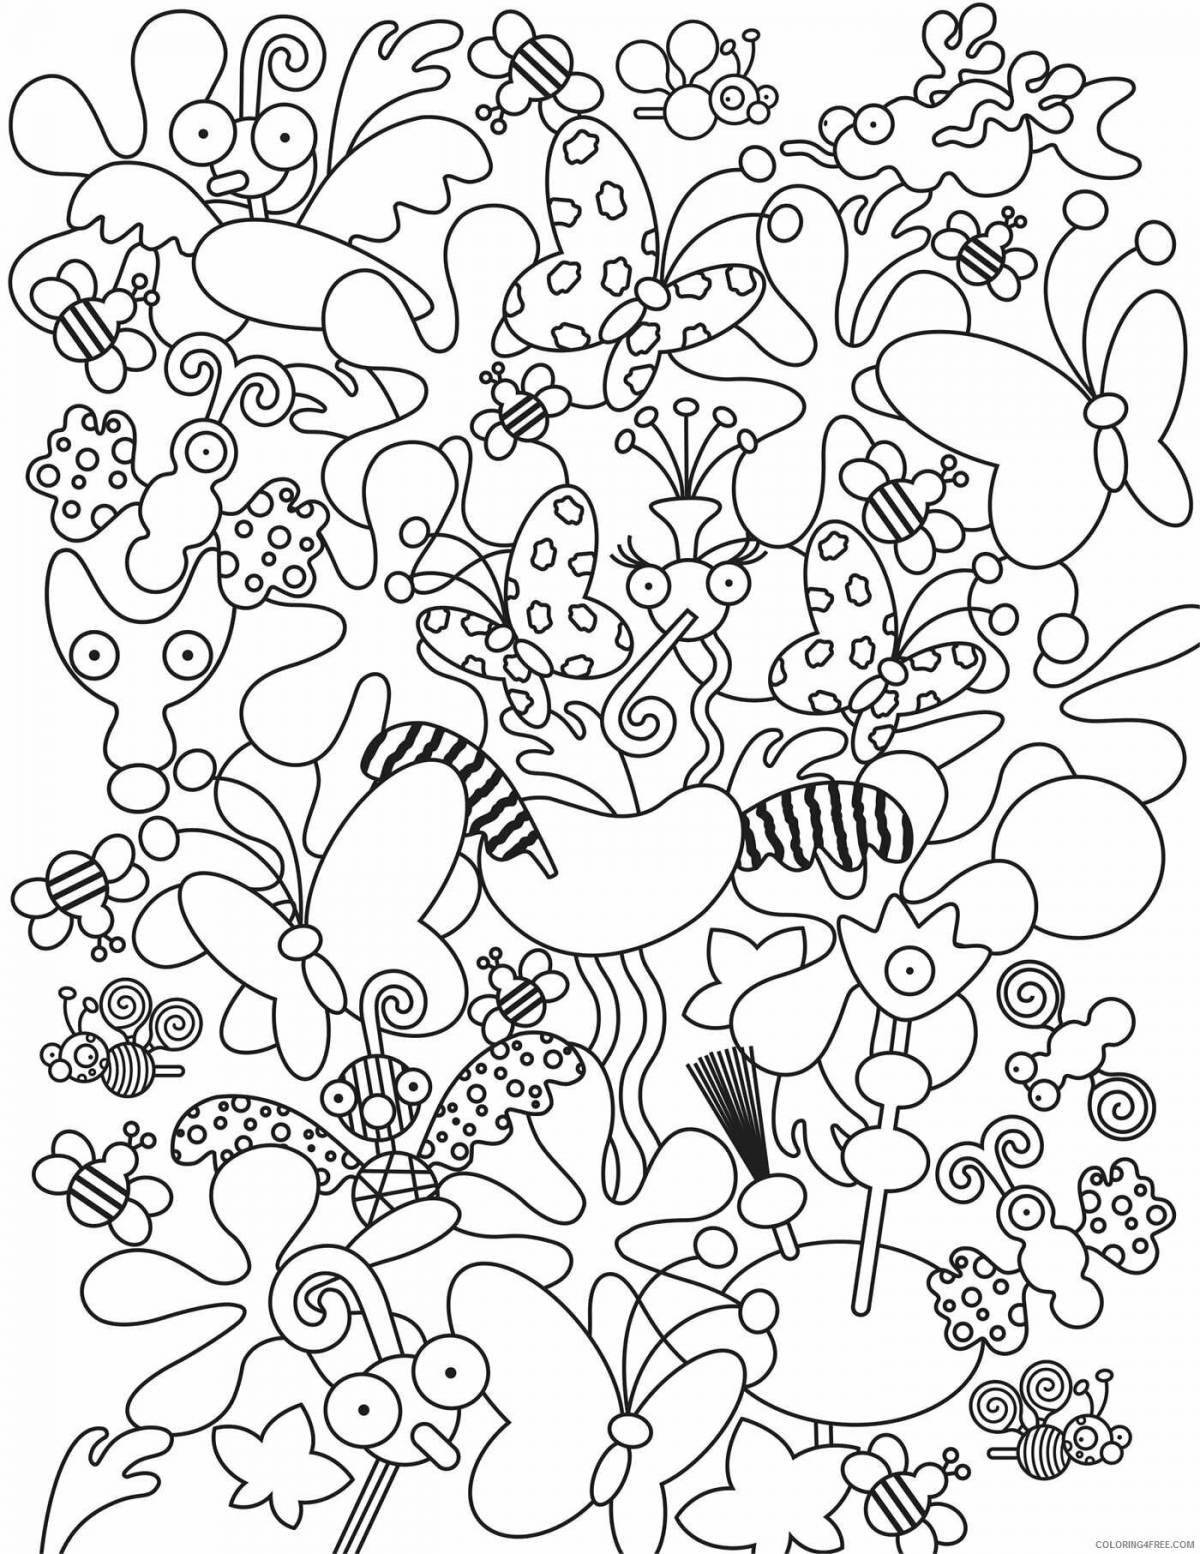 Colour explosion coloring page